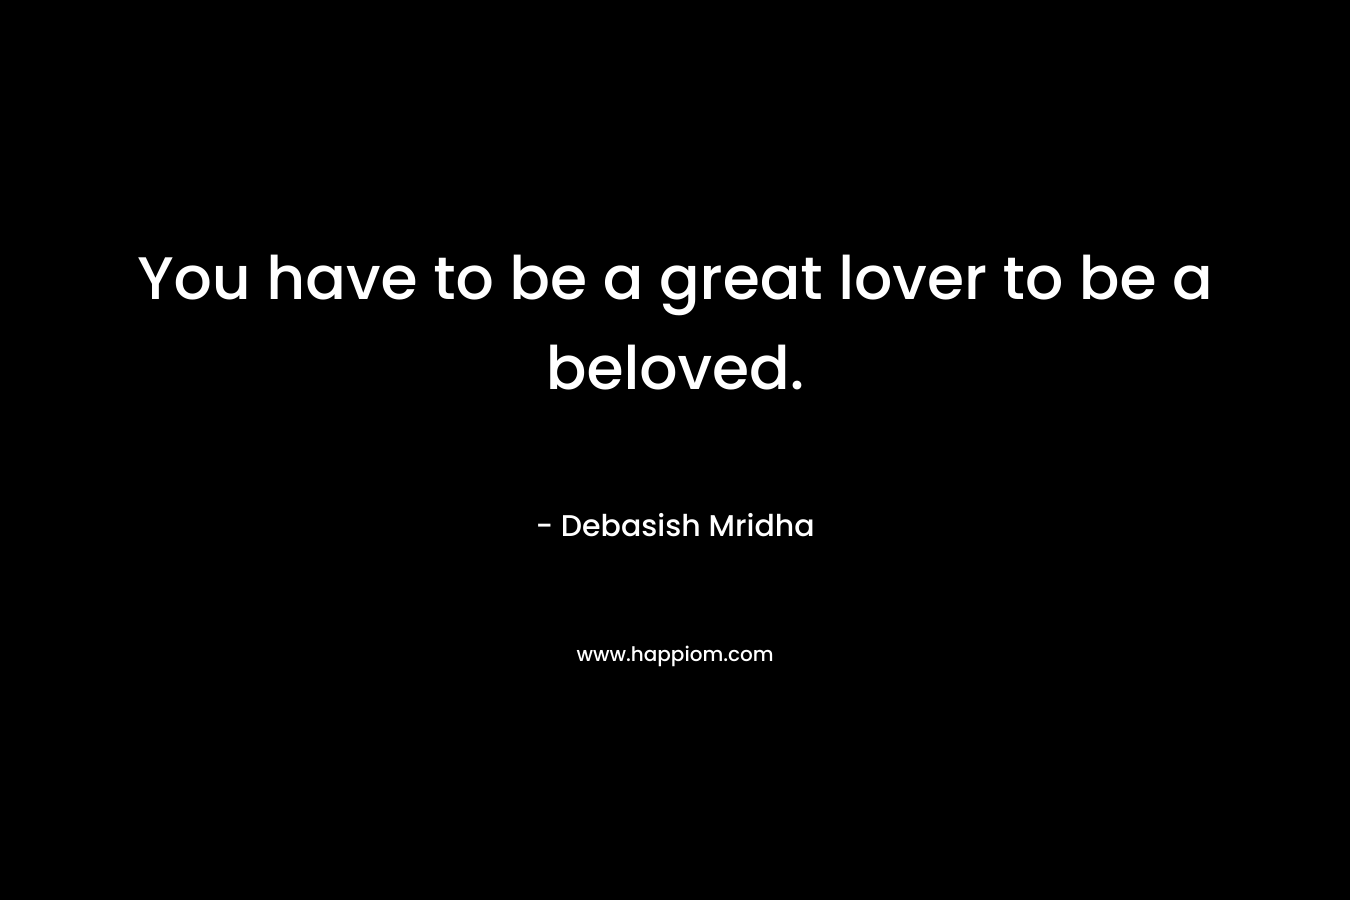 You have to be a great lover to be a beloved.